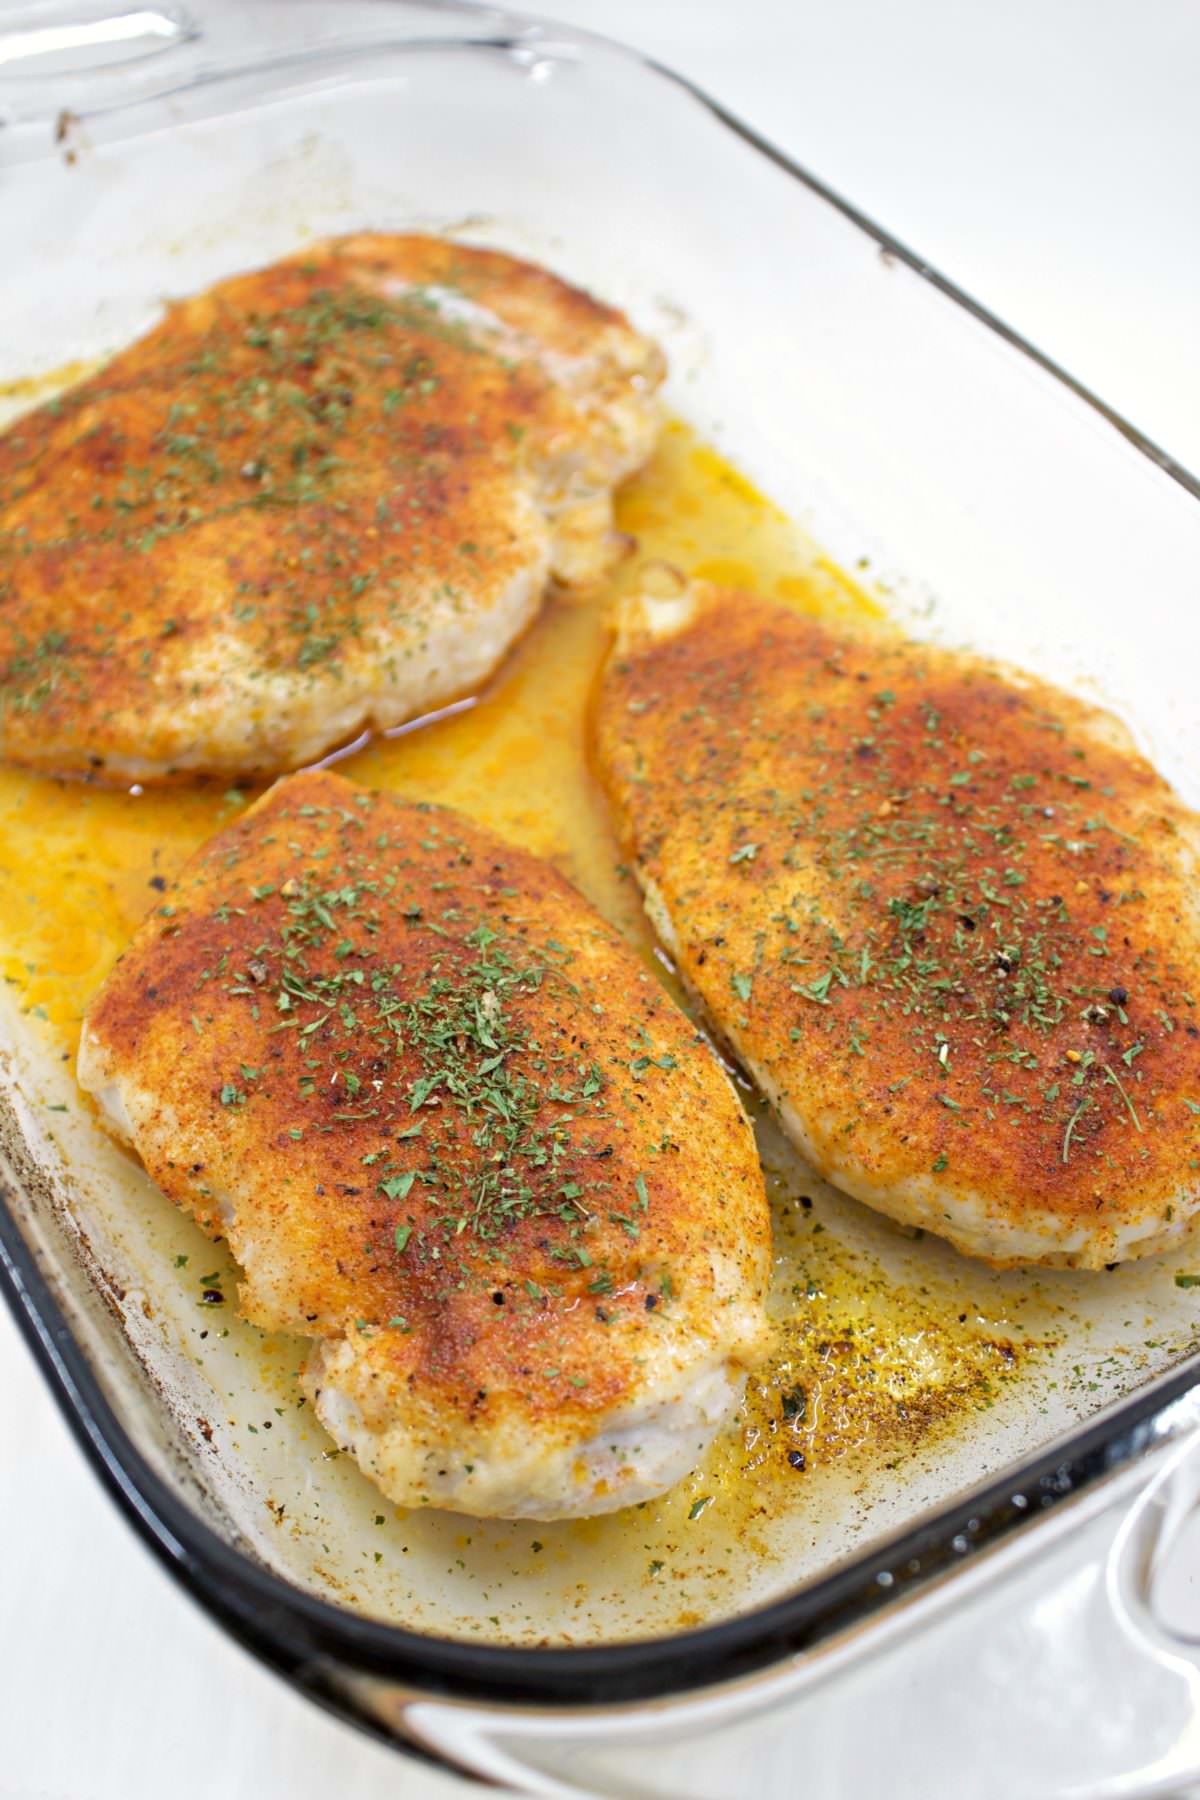 Baked chicken breasts - My Mommy Style